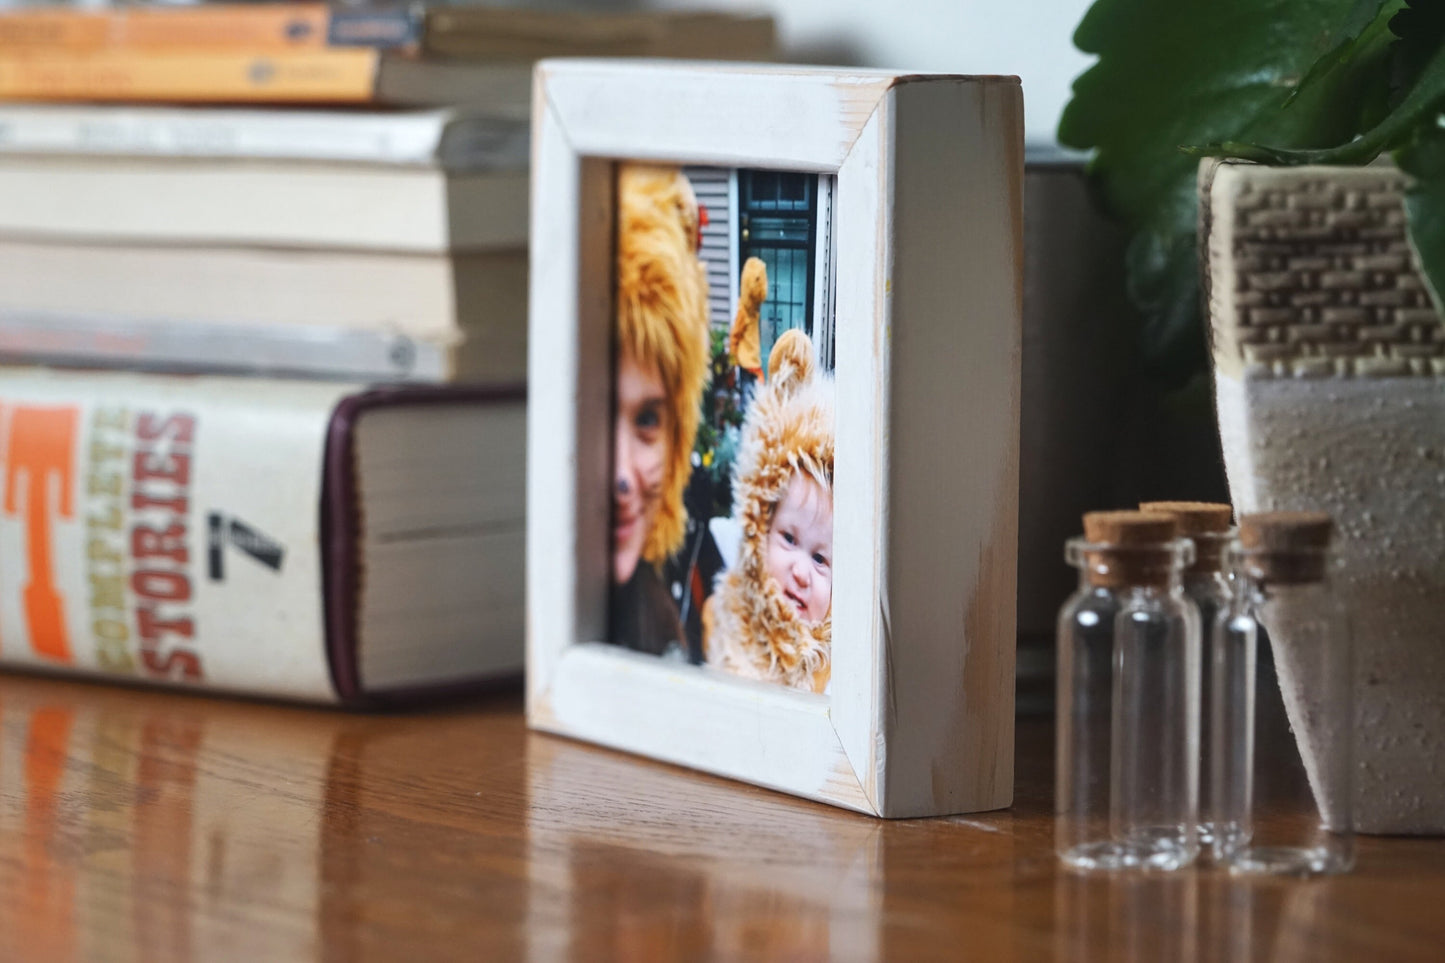 Custom Photo on Wood with Rustic Frame - Farmhouse Wooden Photo Block With Magnet Back, Standing Desk Frame, Rustic Country Decor